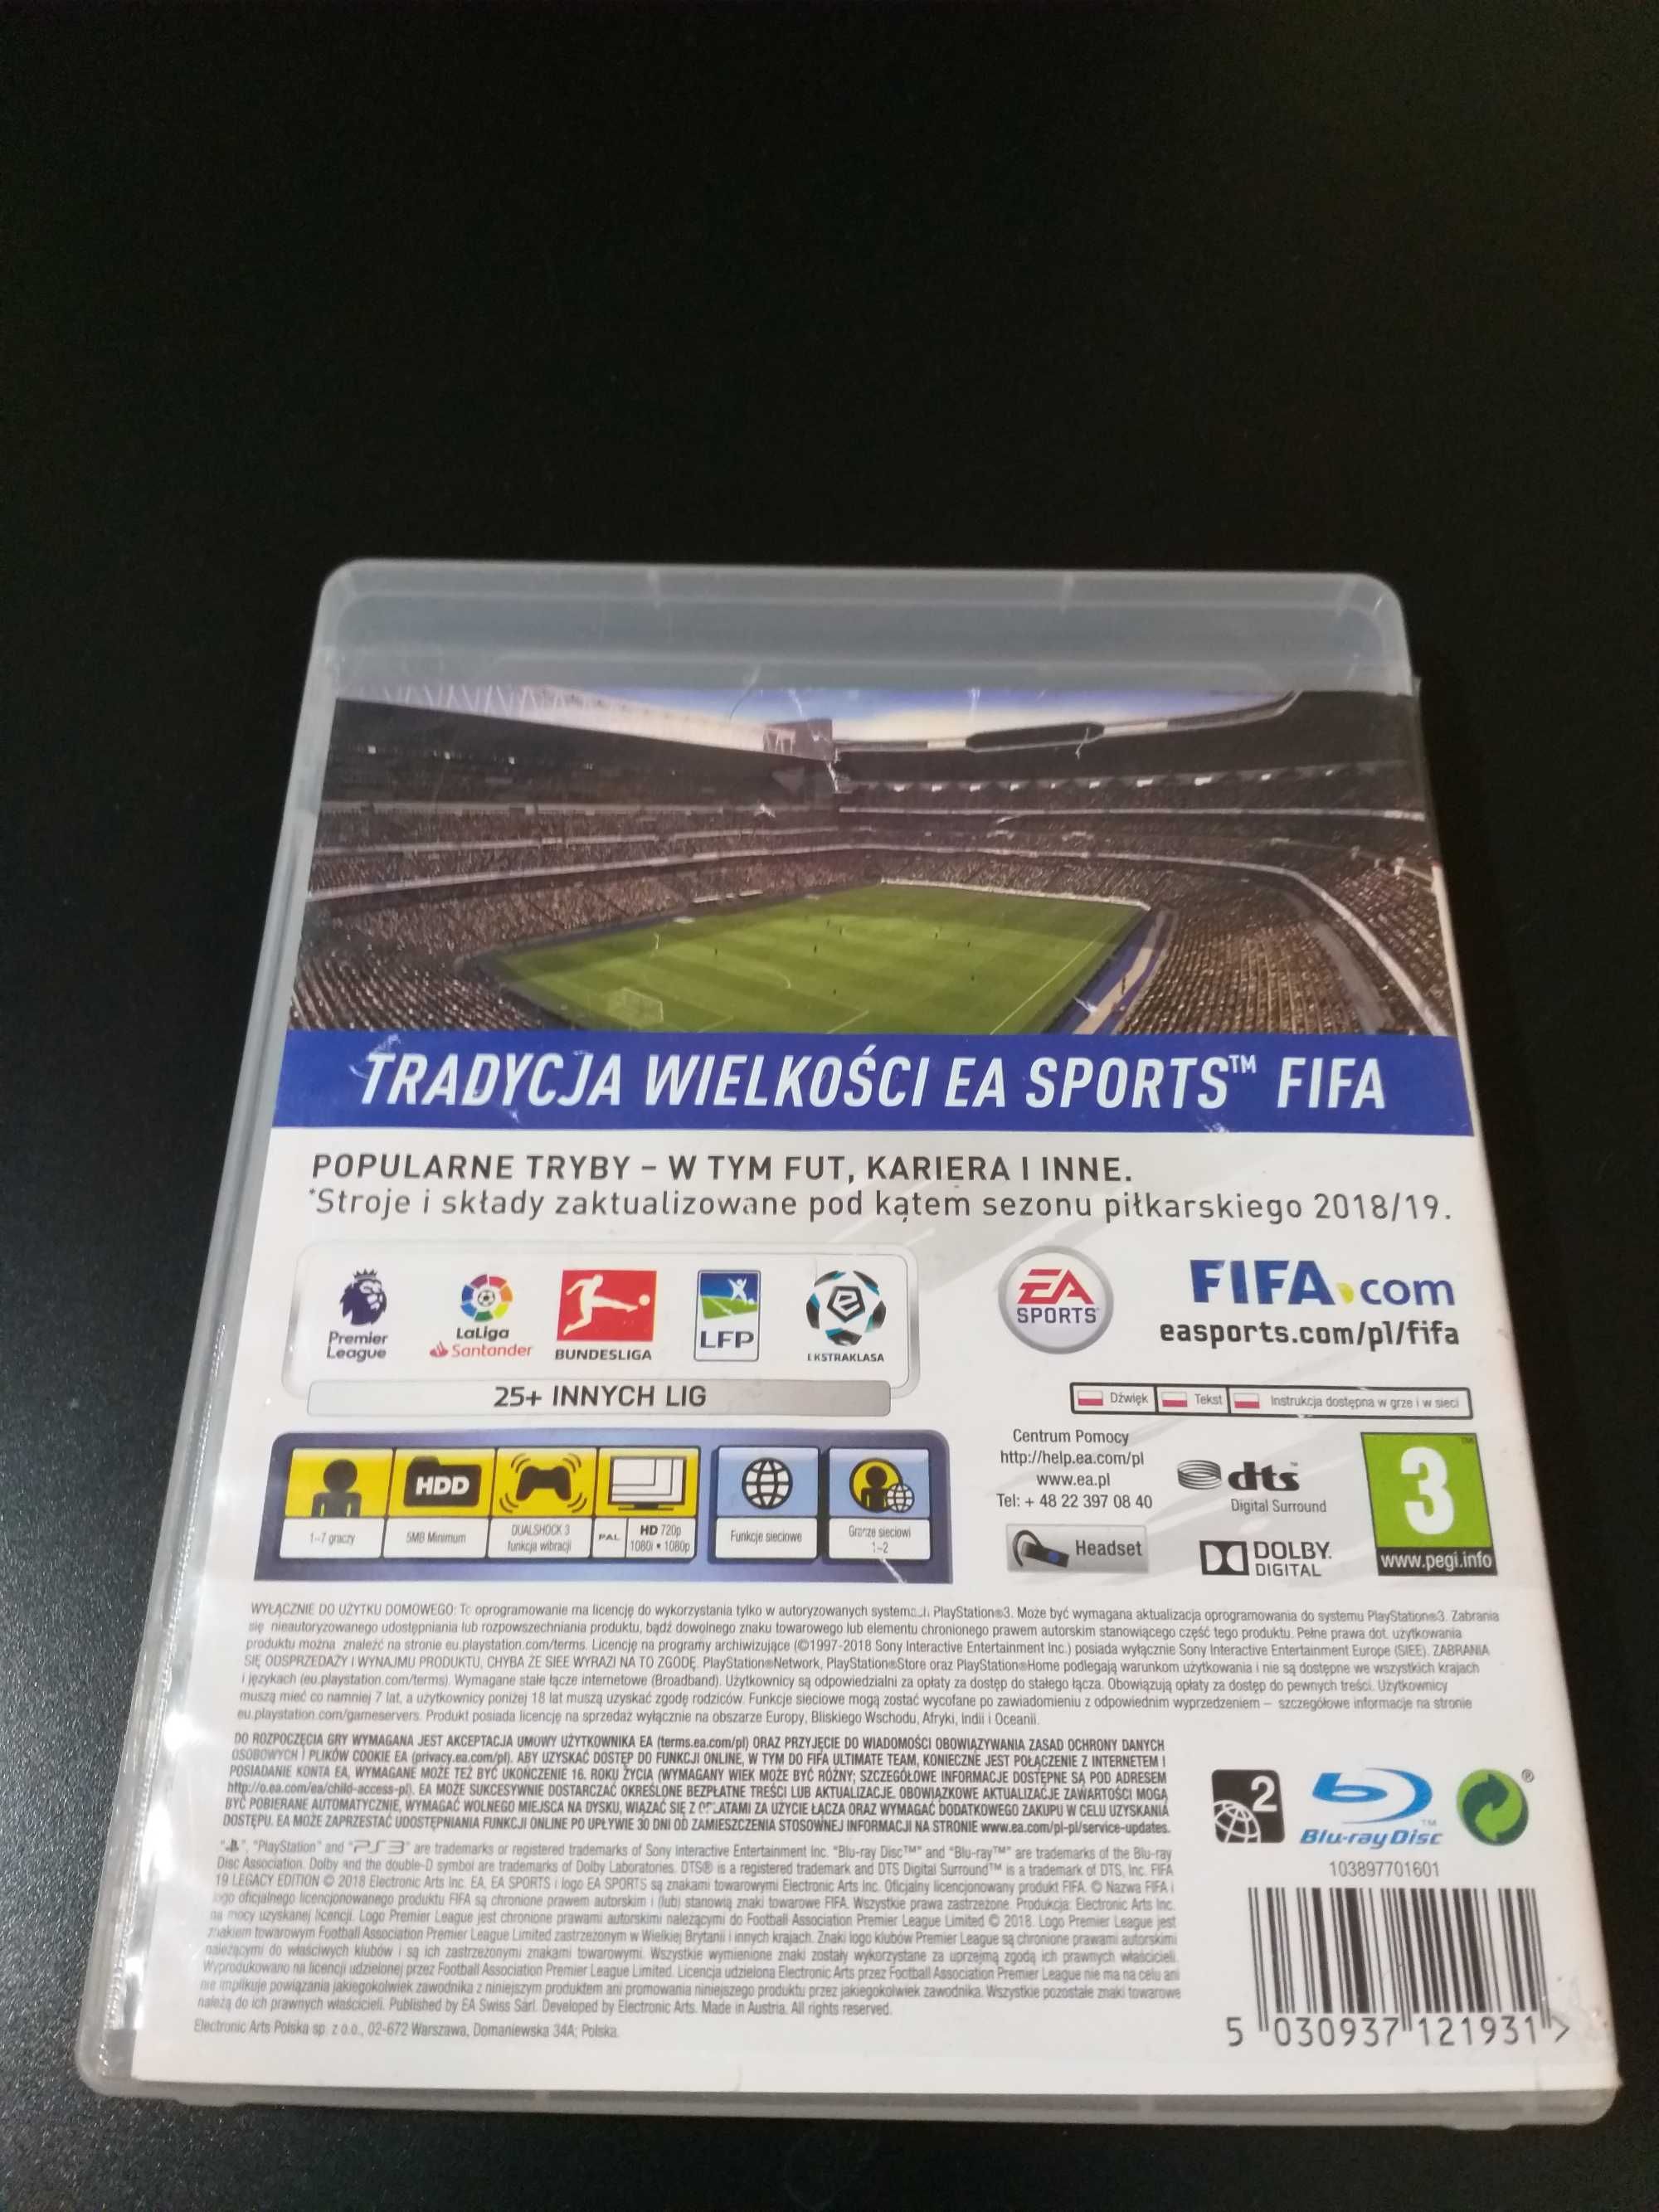 Games PS3 PKG PATCH - FIFA 21 Legacy Editions PS3 v 1.0 free by techgsmdz  link 